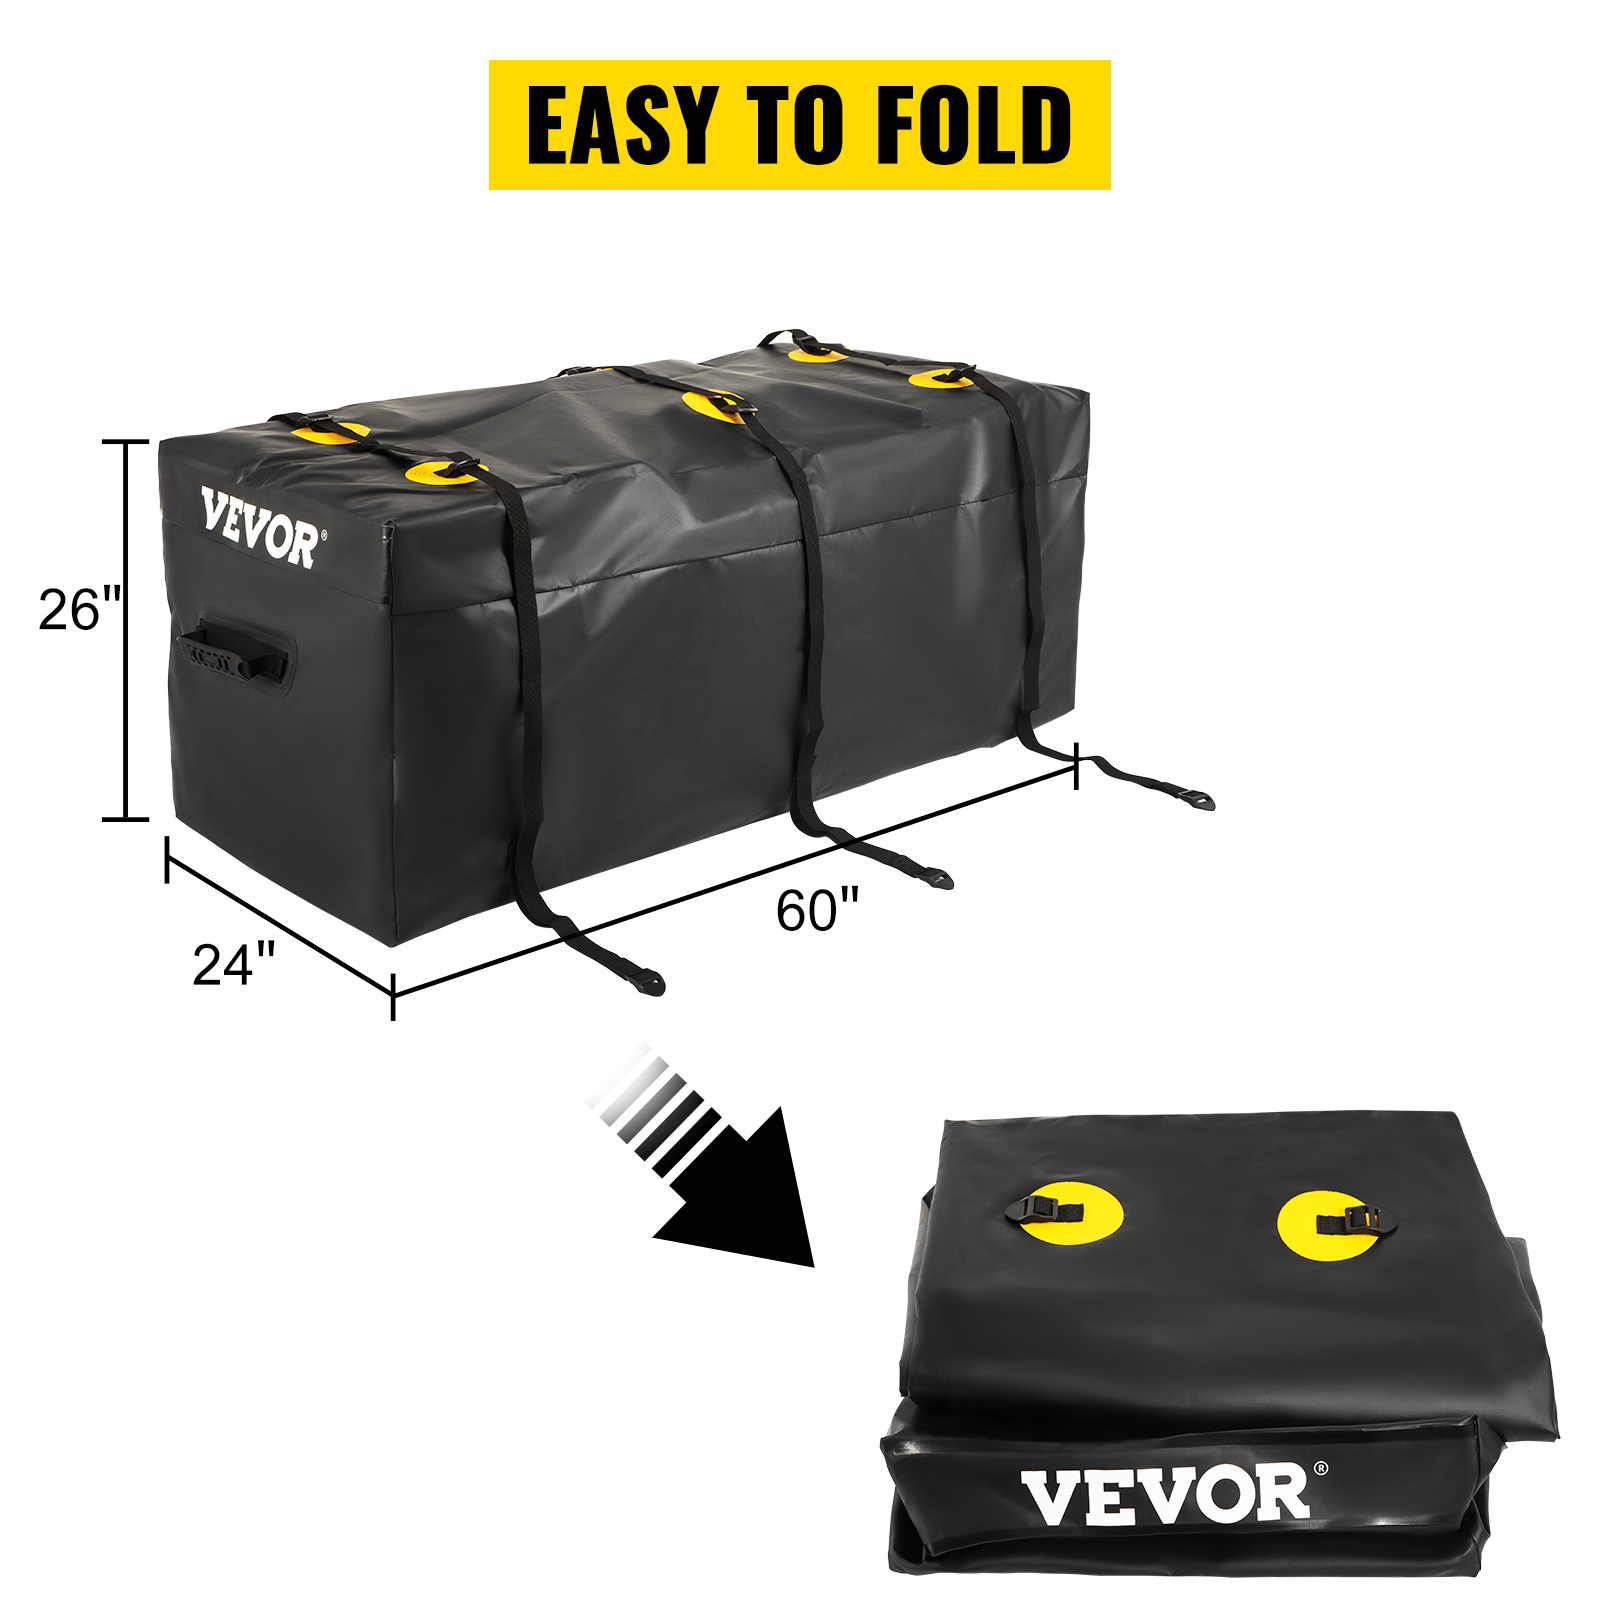 VEVOR Hitch Cargo Carrier Bag, Waterproof 840D PVC, 60x24x26 (22 Cubic  Feet), Heavy Duty Cargo Bag for Hitch Carrier with Reinforced Straps, Fits  Car Truck SUV Vans Hitch Basket